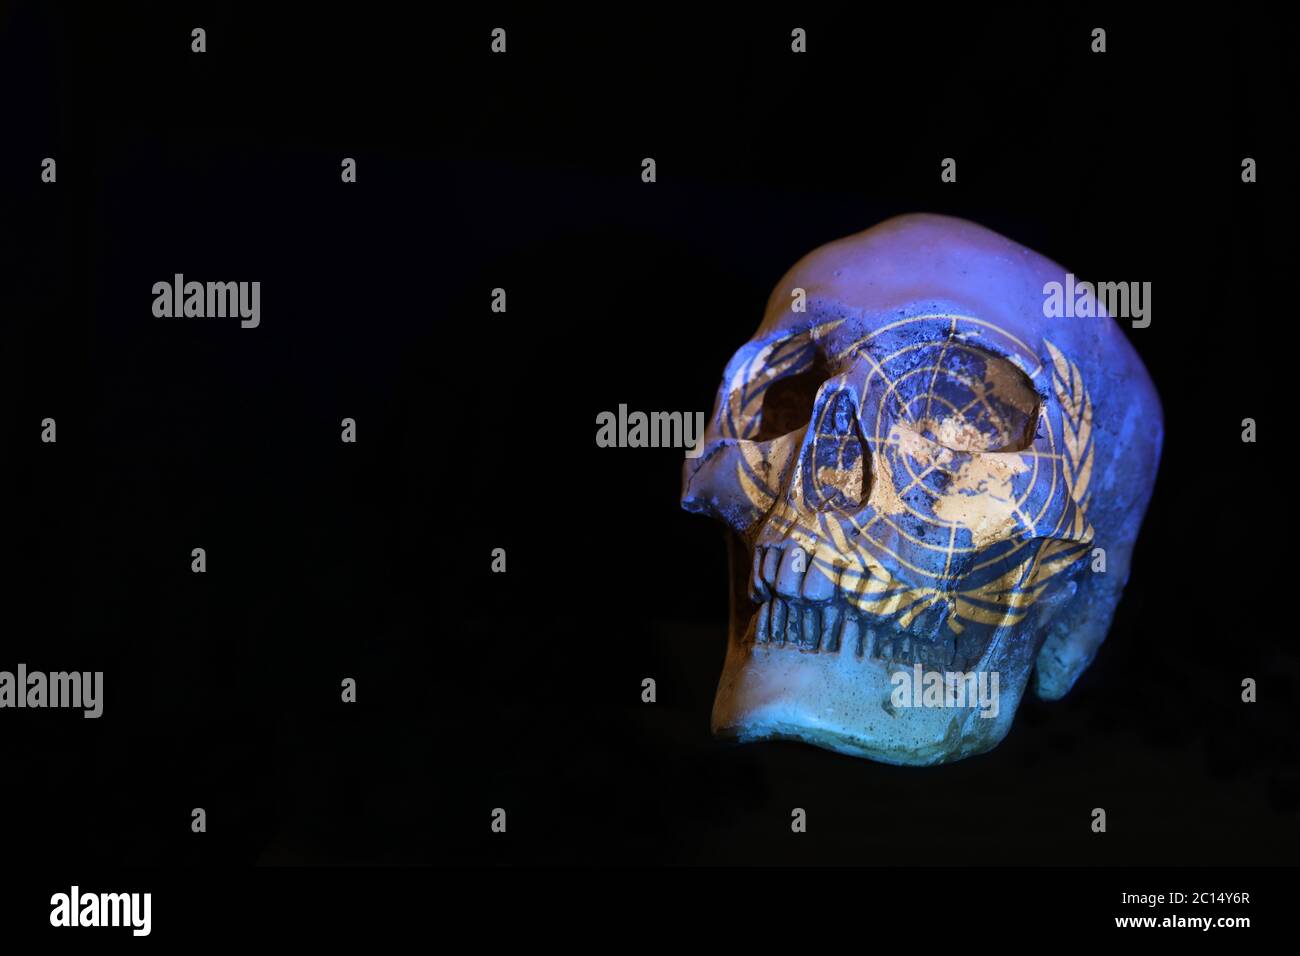 The United Nations UN symbol logo projected over a skull isolated against a plain black background. Stock Photo